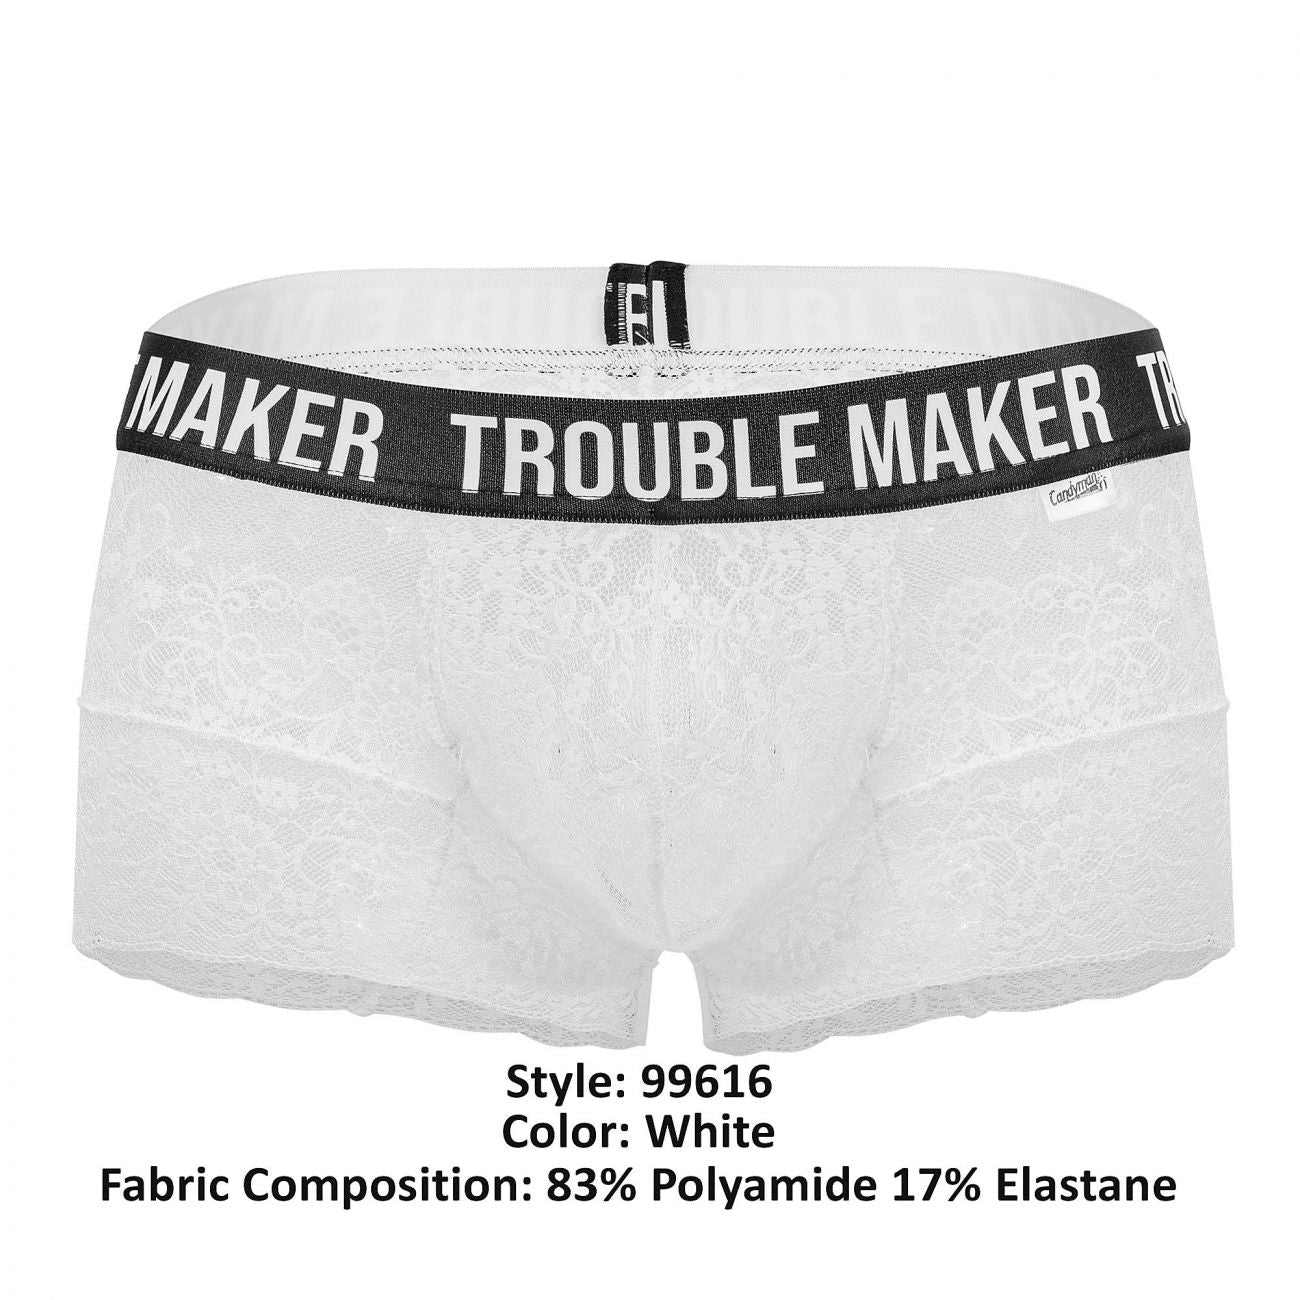 CandyMan 99616 Trouble Maker Lace Trunks White